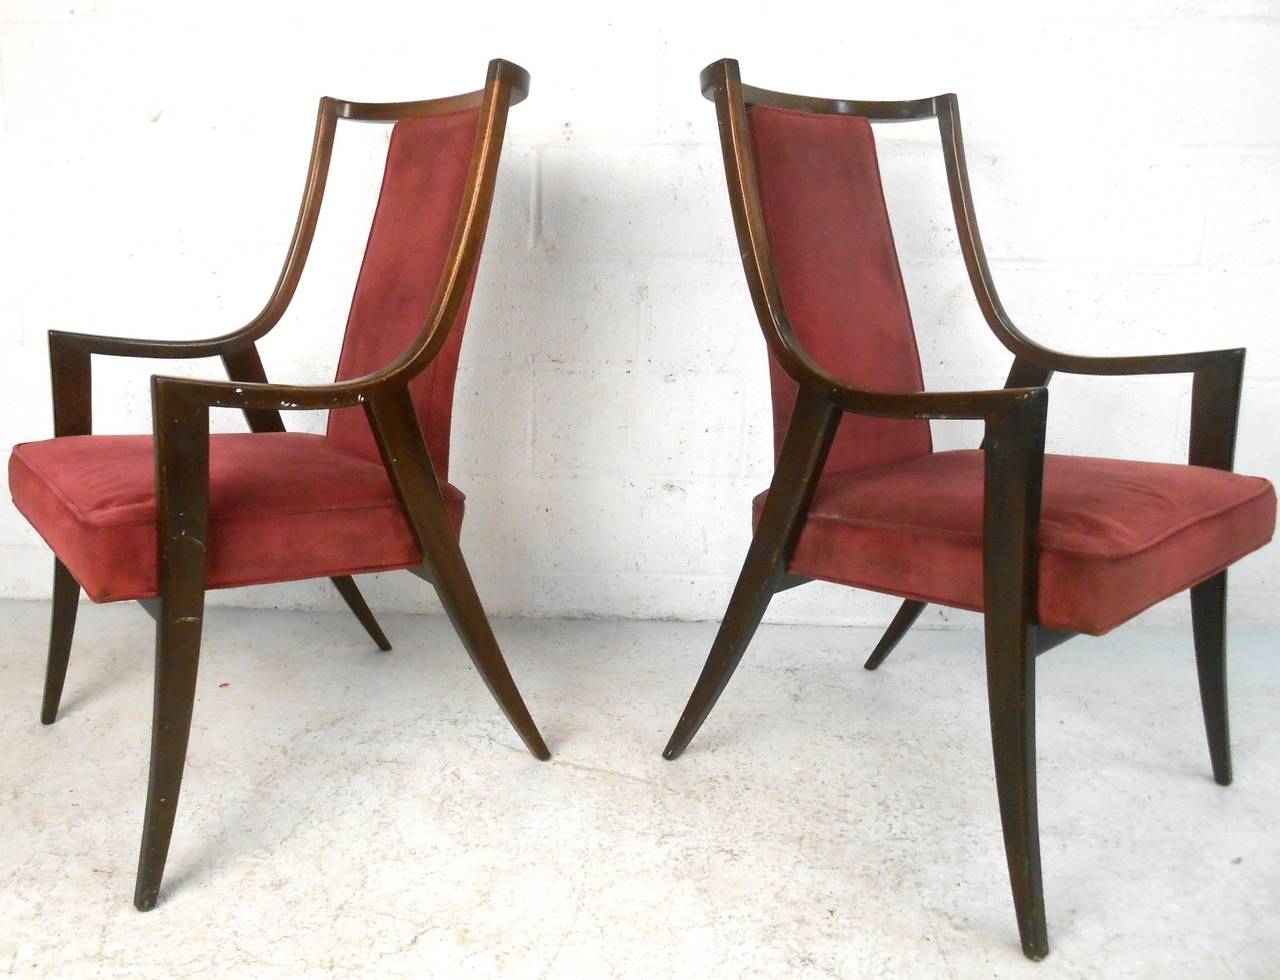 Mid-20th Century Pair of Mid-Century Modern Armchairs after T.H. Robsjohn-Gibbings